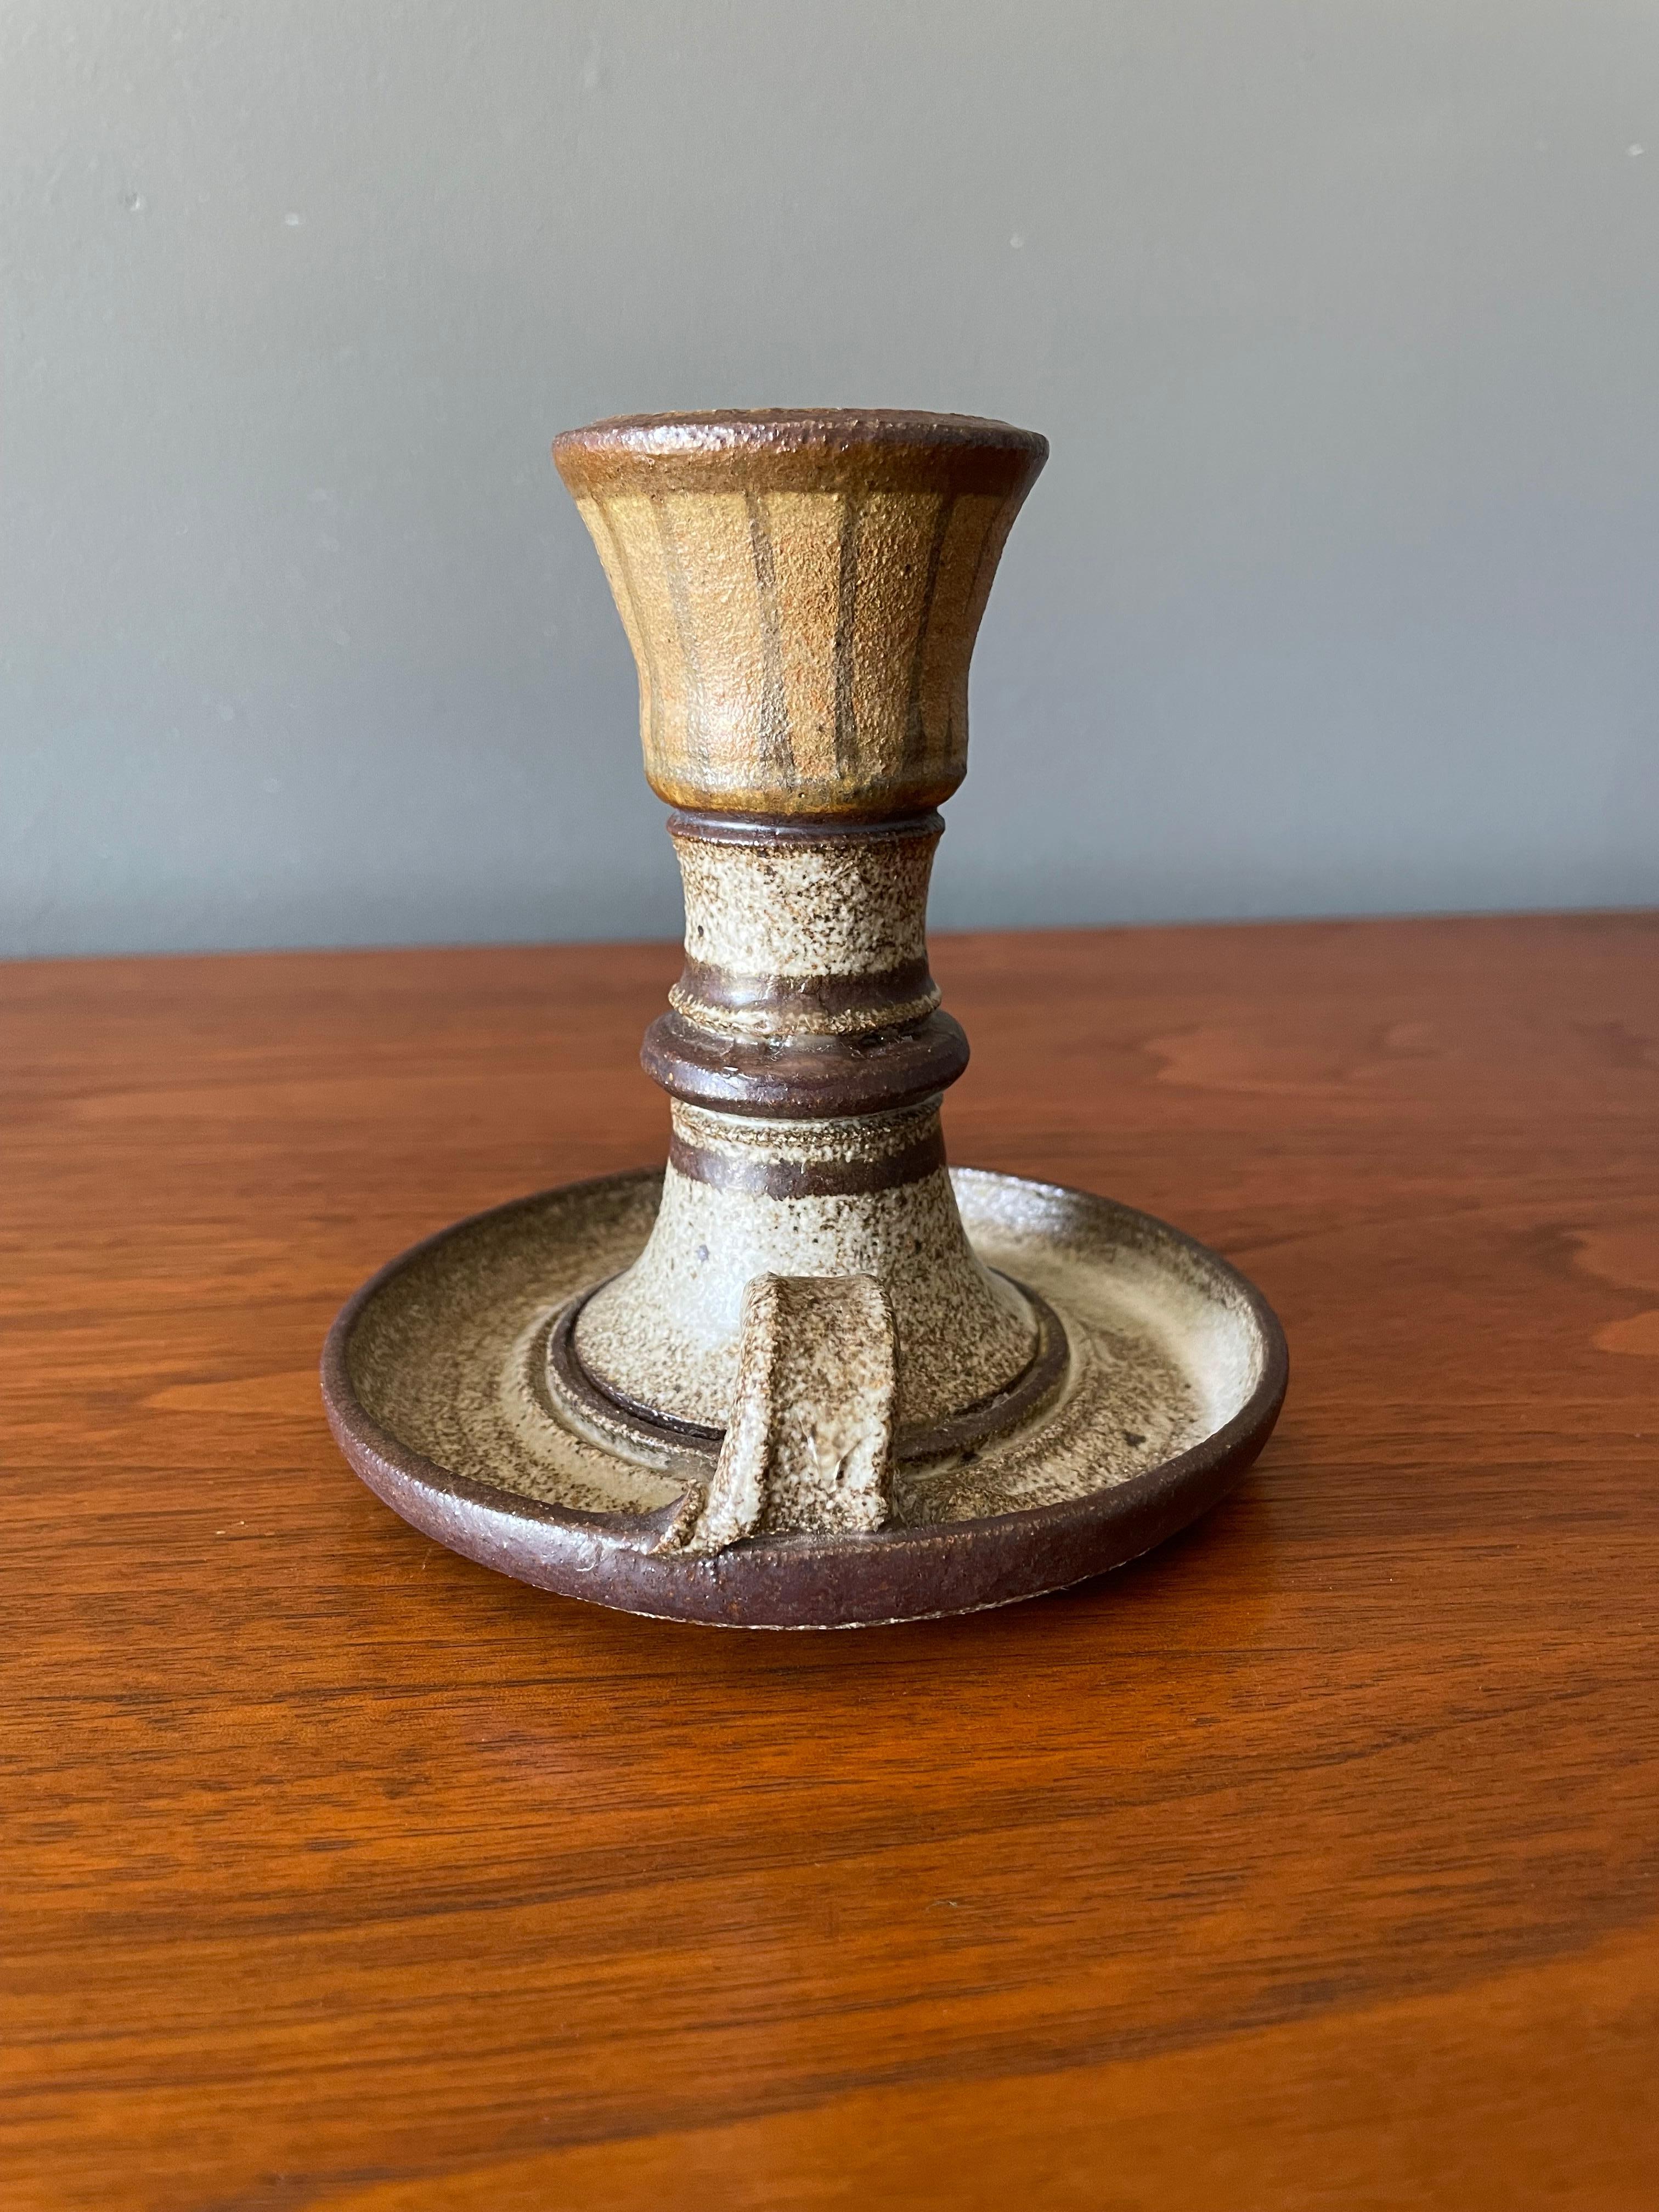 Vintage chamber stick candle holder. Circa 1970s. Beautiful brown speckled glazing pattern.